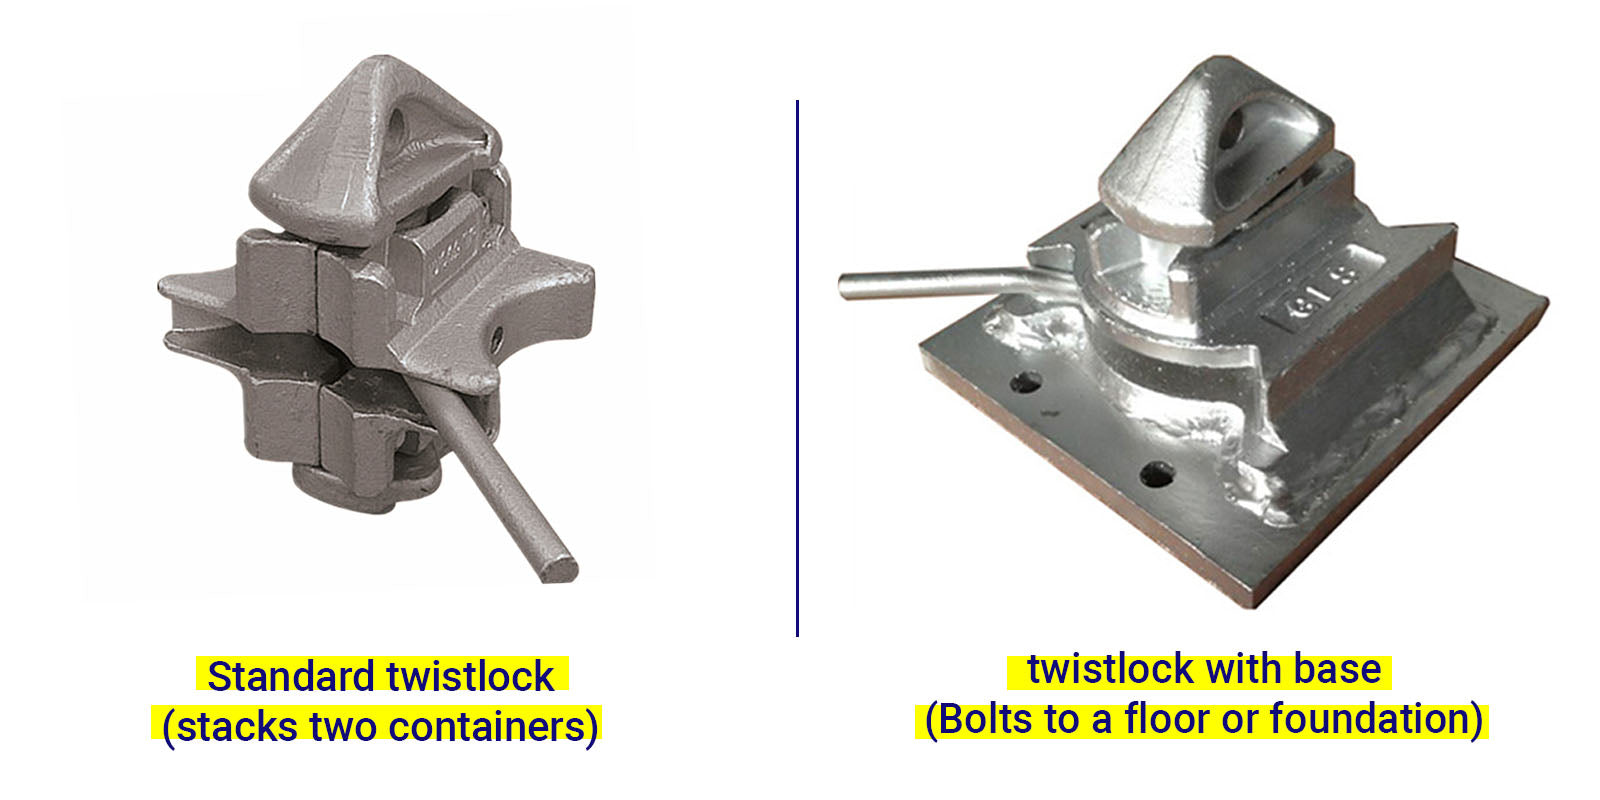 Shipping Container Locks, Lock and Lock Containers Twistlock - Manual -  China Shipping Container Locks, Container Twistlock